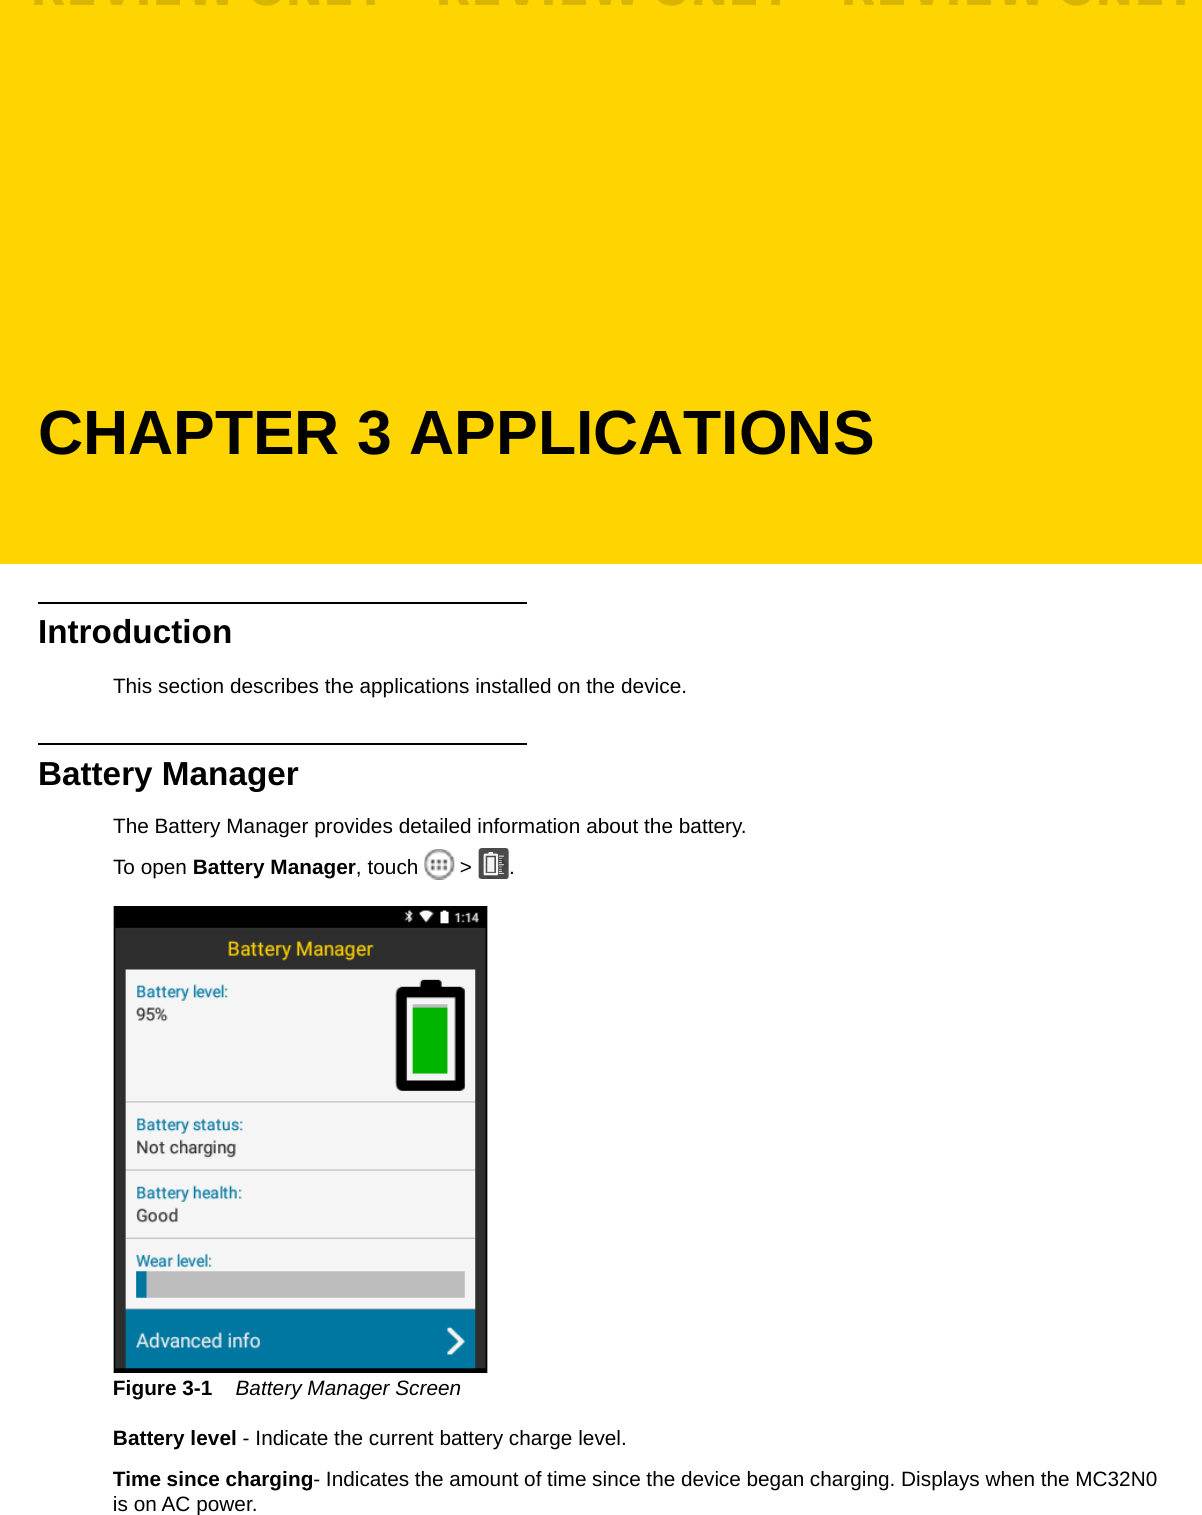 CHAPTER 3 APPLICATIONSIntroductionThis section describes the applications installed on the device.Battery ManagerThe Battery Manager provides detailed information about the battery.To open Battery Manager, touch   &gt;  .Figure 3-1    Battery Manager ScreenBattery level - Indicate the current battery charge level.Time since charging- Indicates the amount of time since the device began charging. Displays when the MC32N0 is on AC power.REVIEW ONLY - REVIEW ONLY - REVIEW ONLY                             REVIEW ONLY - REVIEW ONLY - REVIEW ONLY